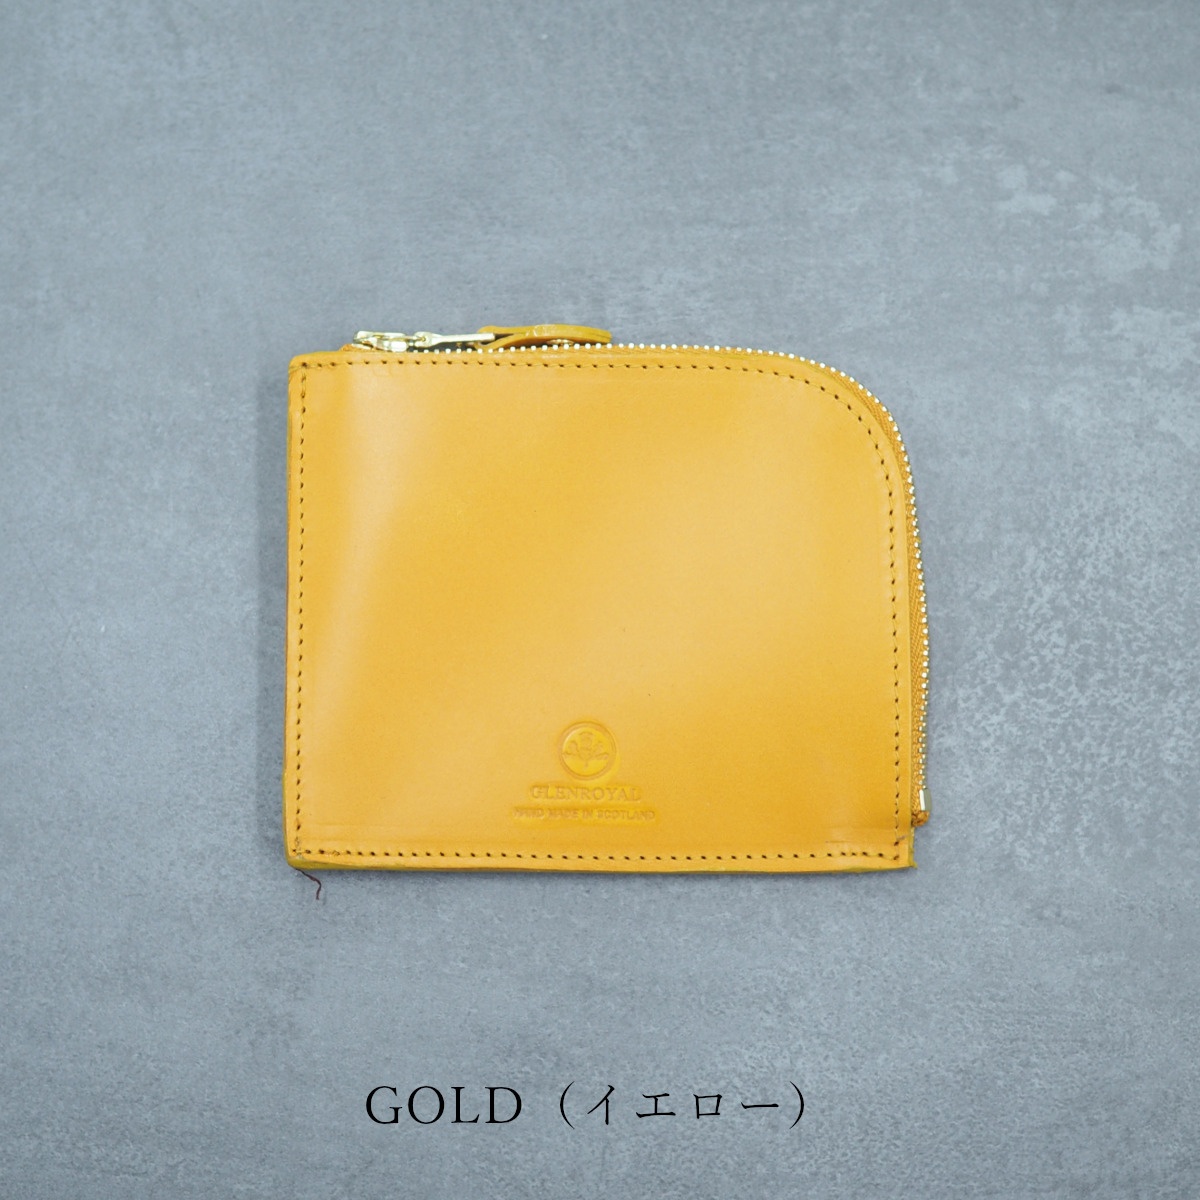 GLENROYAL 6043 ZIP MINI PURSE WITH GUSSET フラグメントケー...